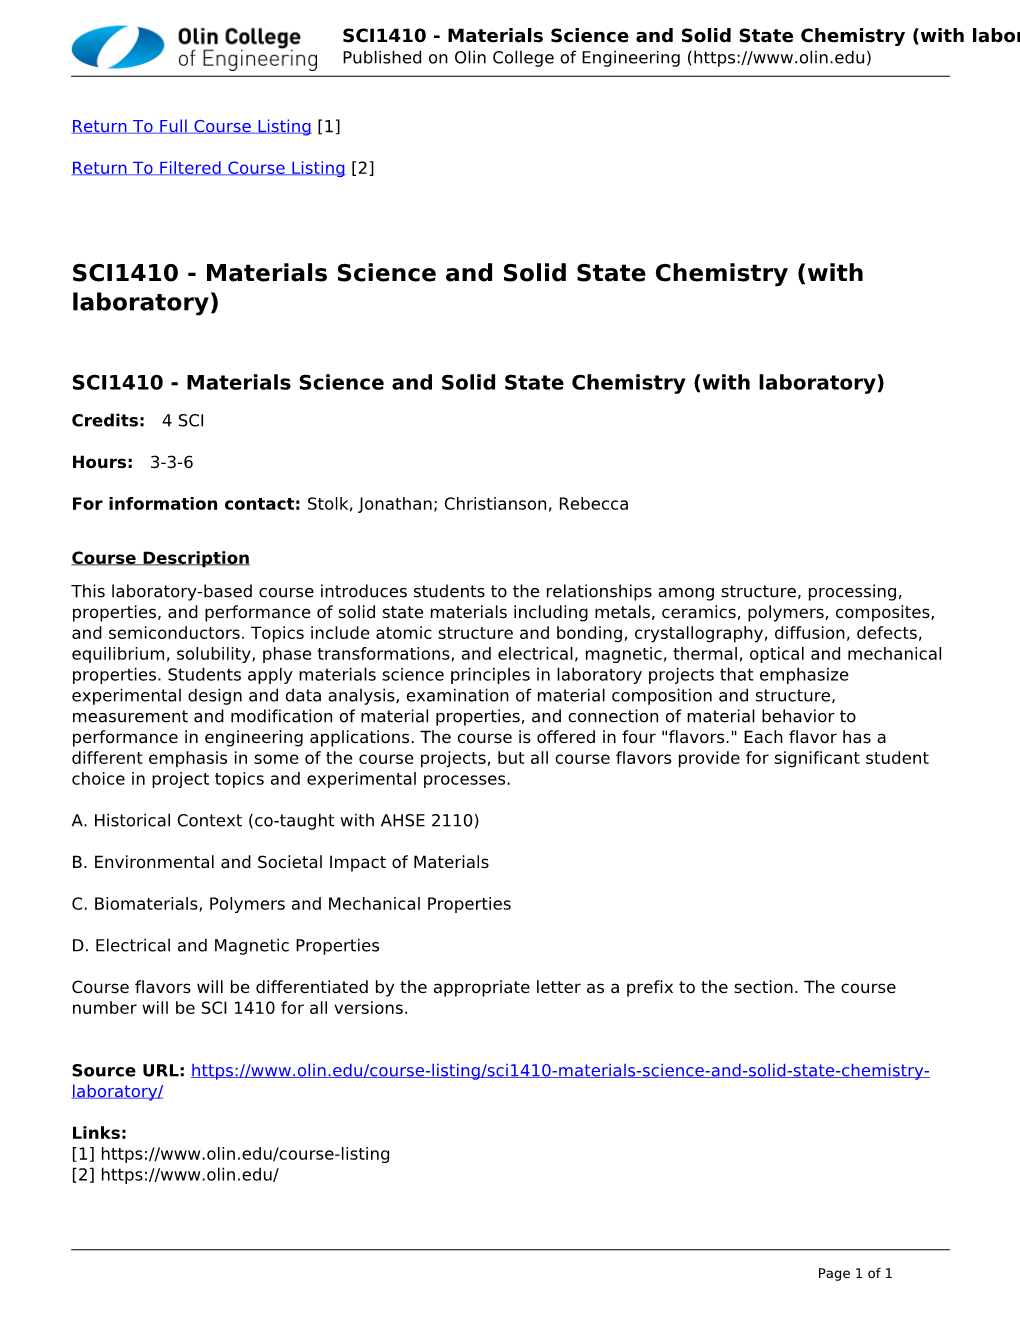 SCI1410 - Materials Science and Solid State Chemistry (With Laboratory) Published on Olin College of Engineering (